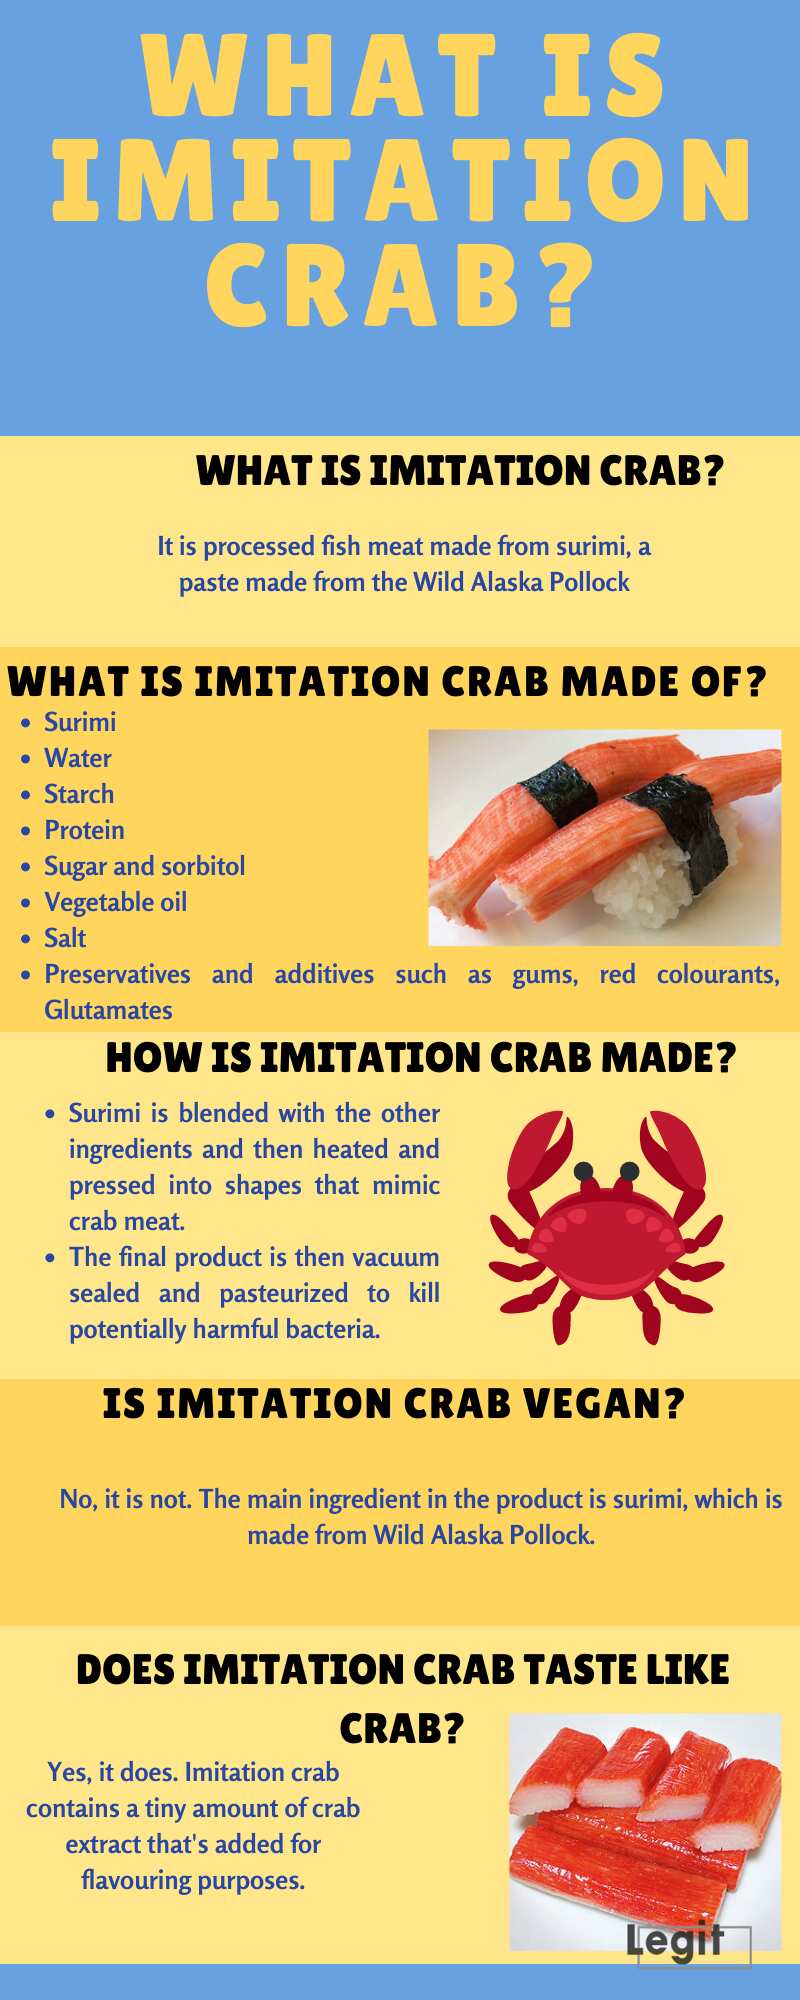 What is imitation crab